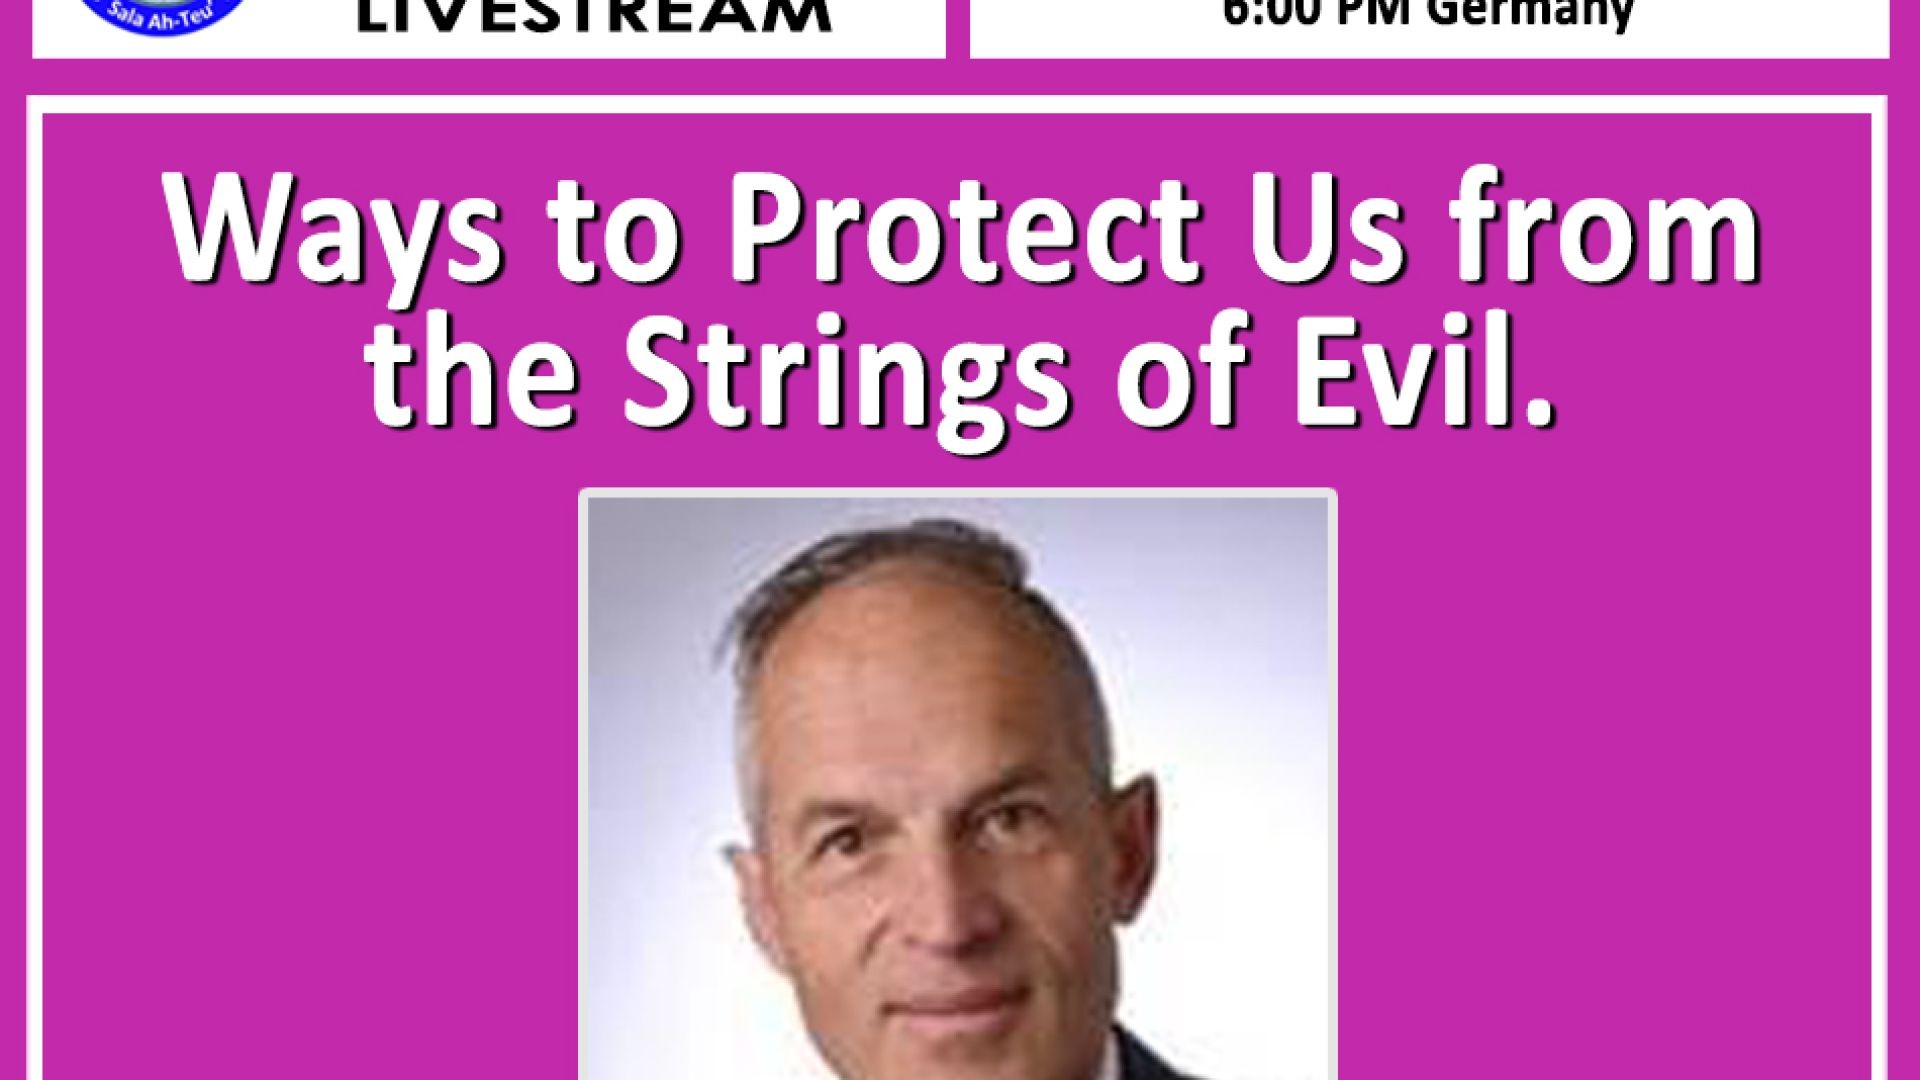 Christian Oesch - “Ways to Protect Us from the Strings of Evil”